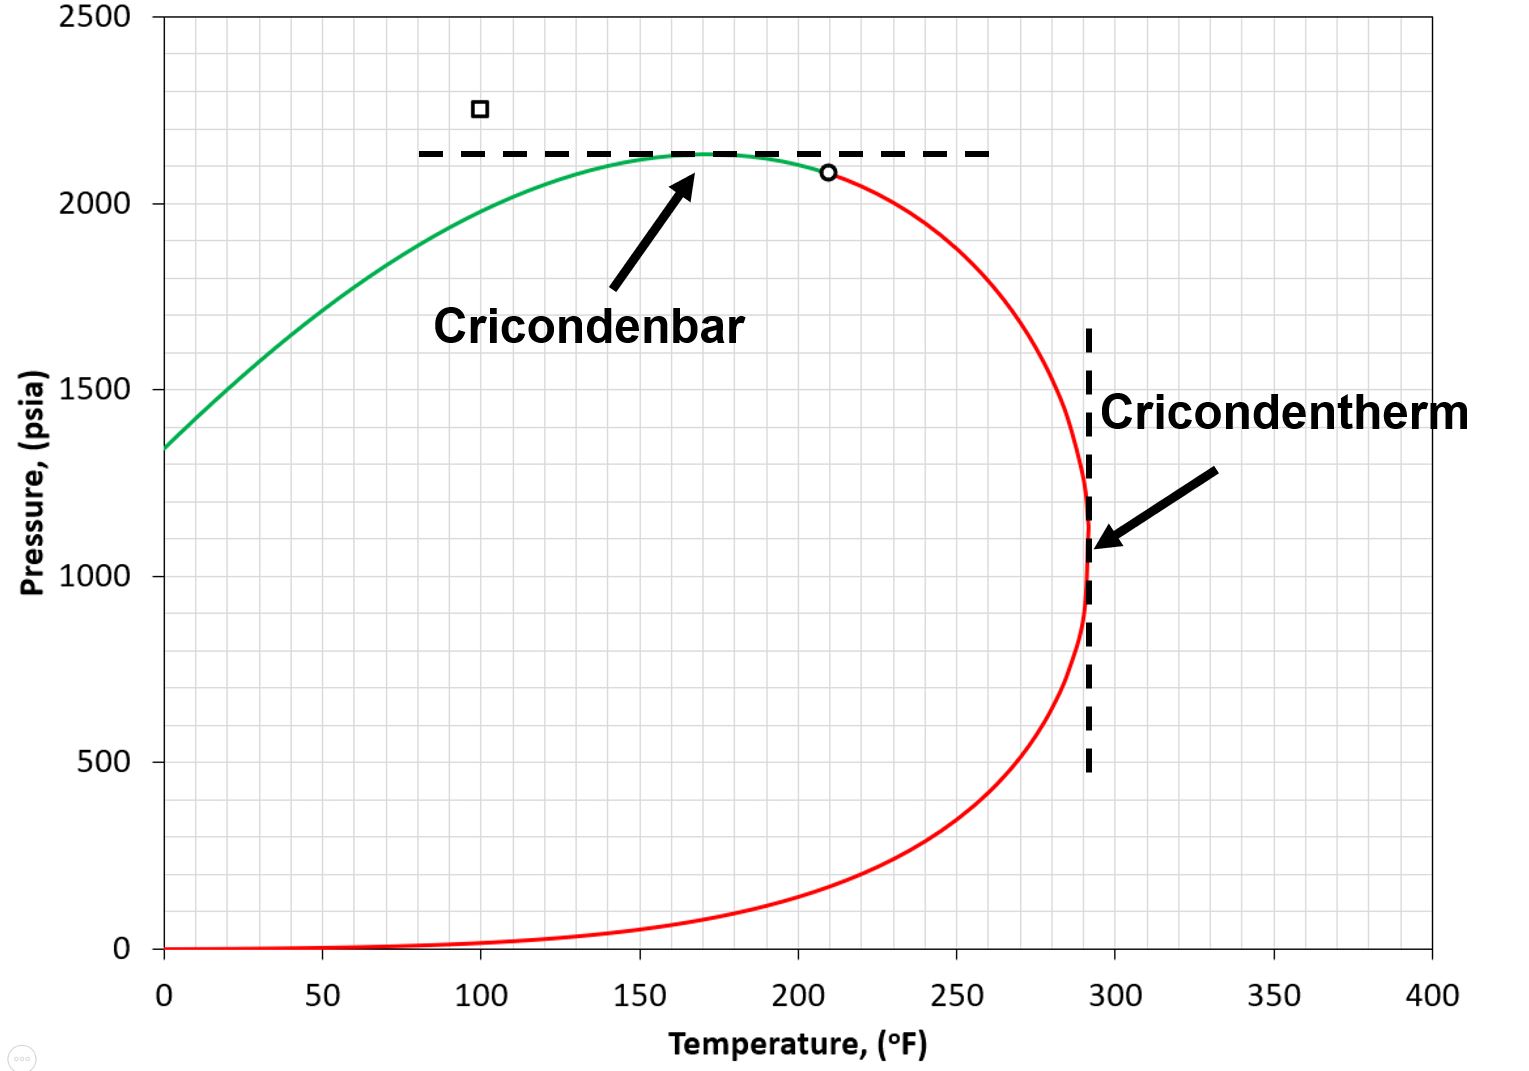 Figure of cricondentherm and cricondenbar on a phase envelope